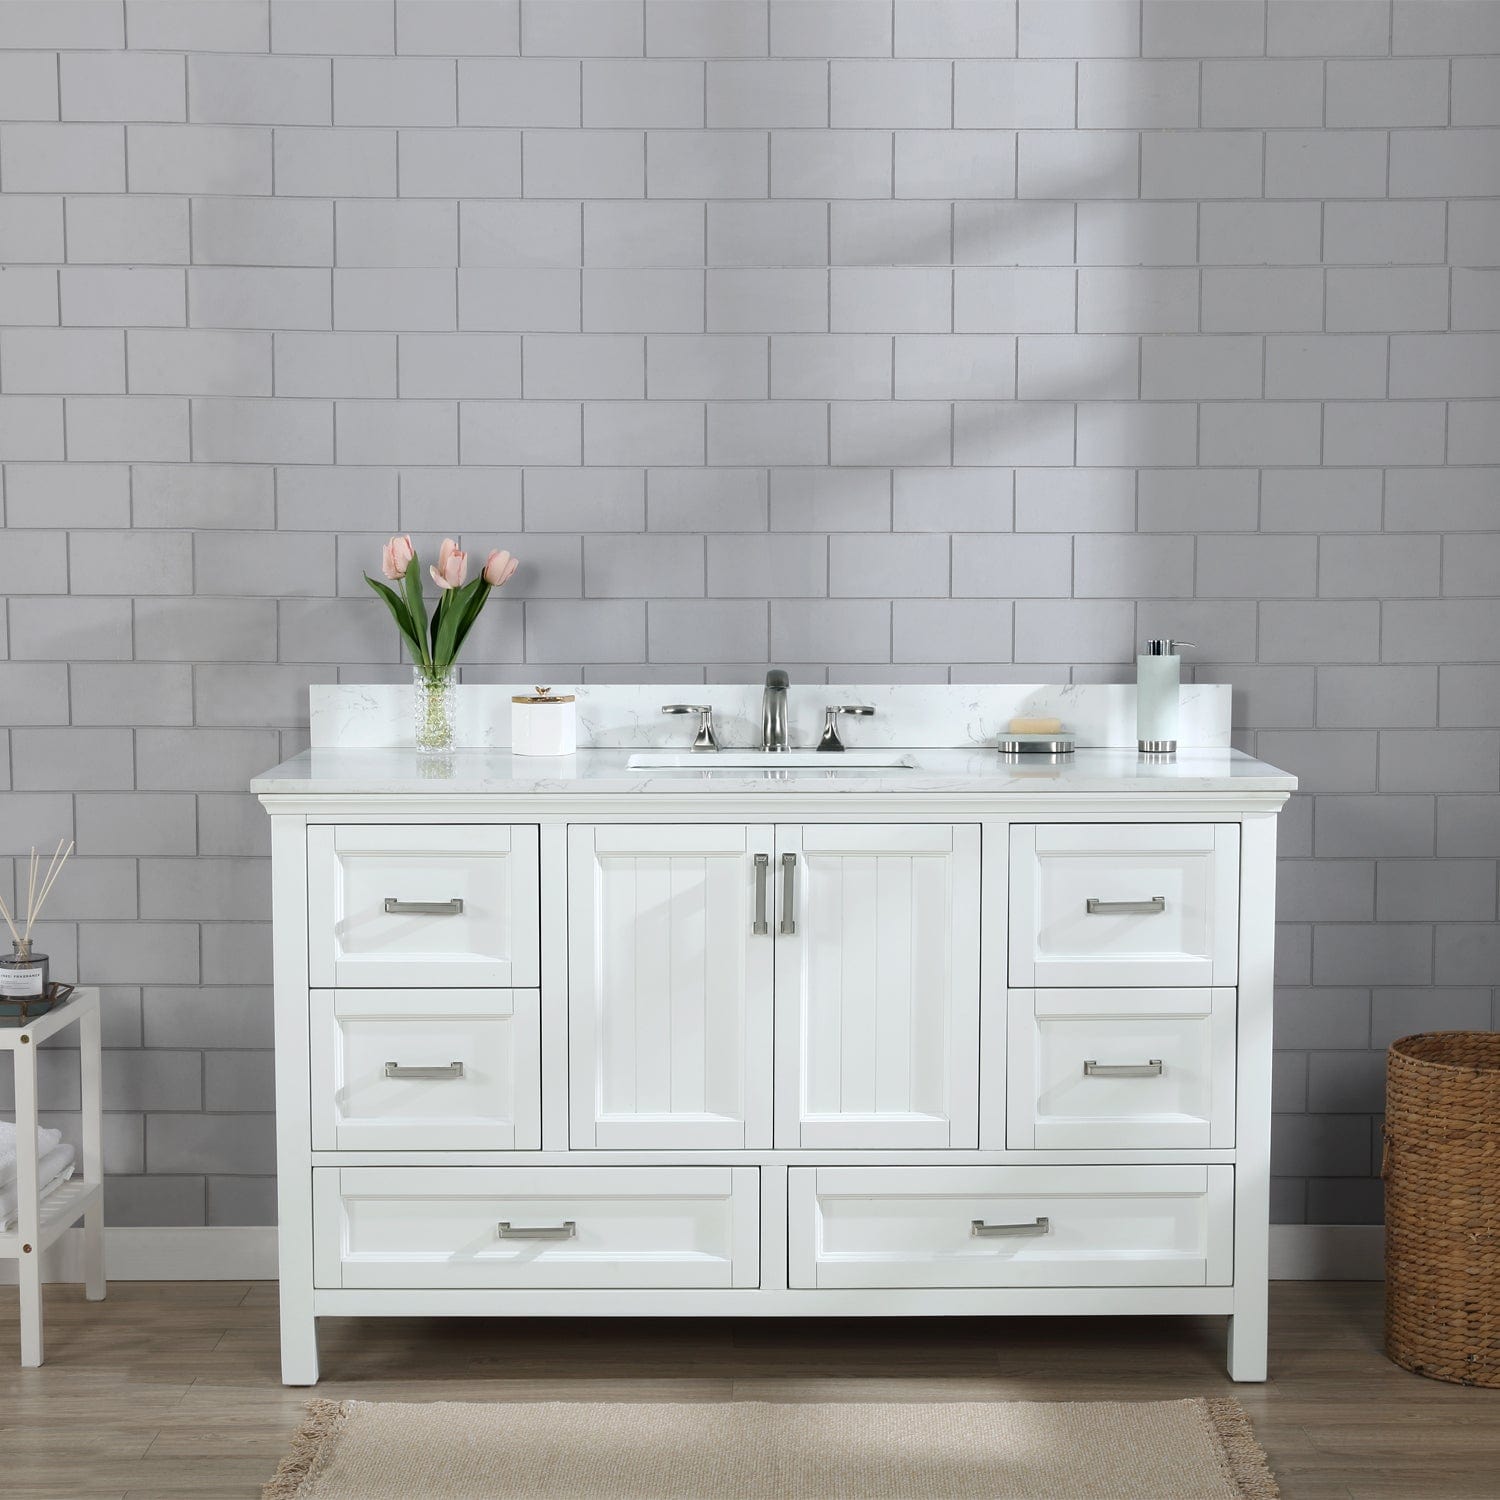 Altair Isla 60" Single Bathroom Vanity Set in White and Carrara White Marble Countertop without Mirror 538060S-WH-AW-NM - Molaix696952511369Vanity538060S-WH-AW-NM